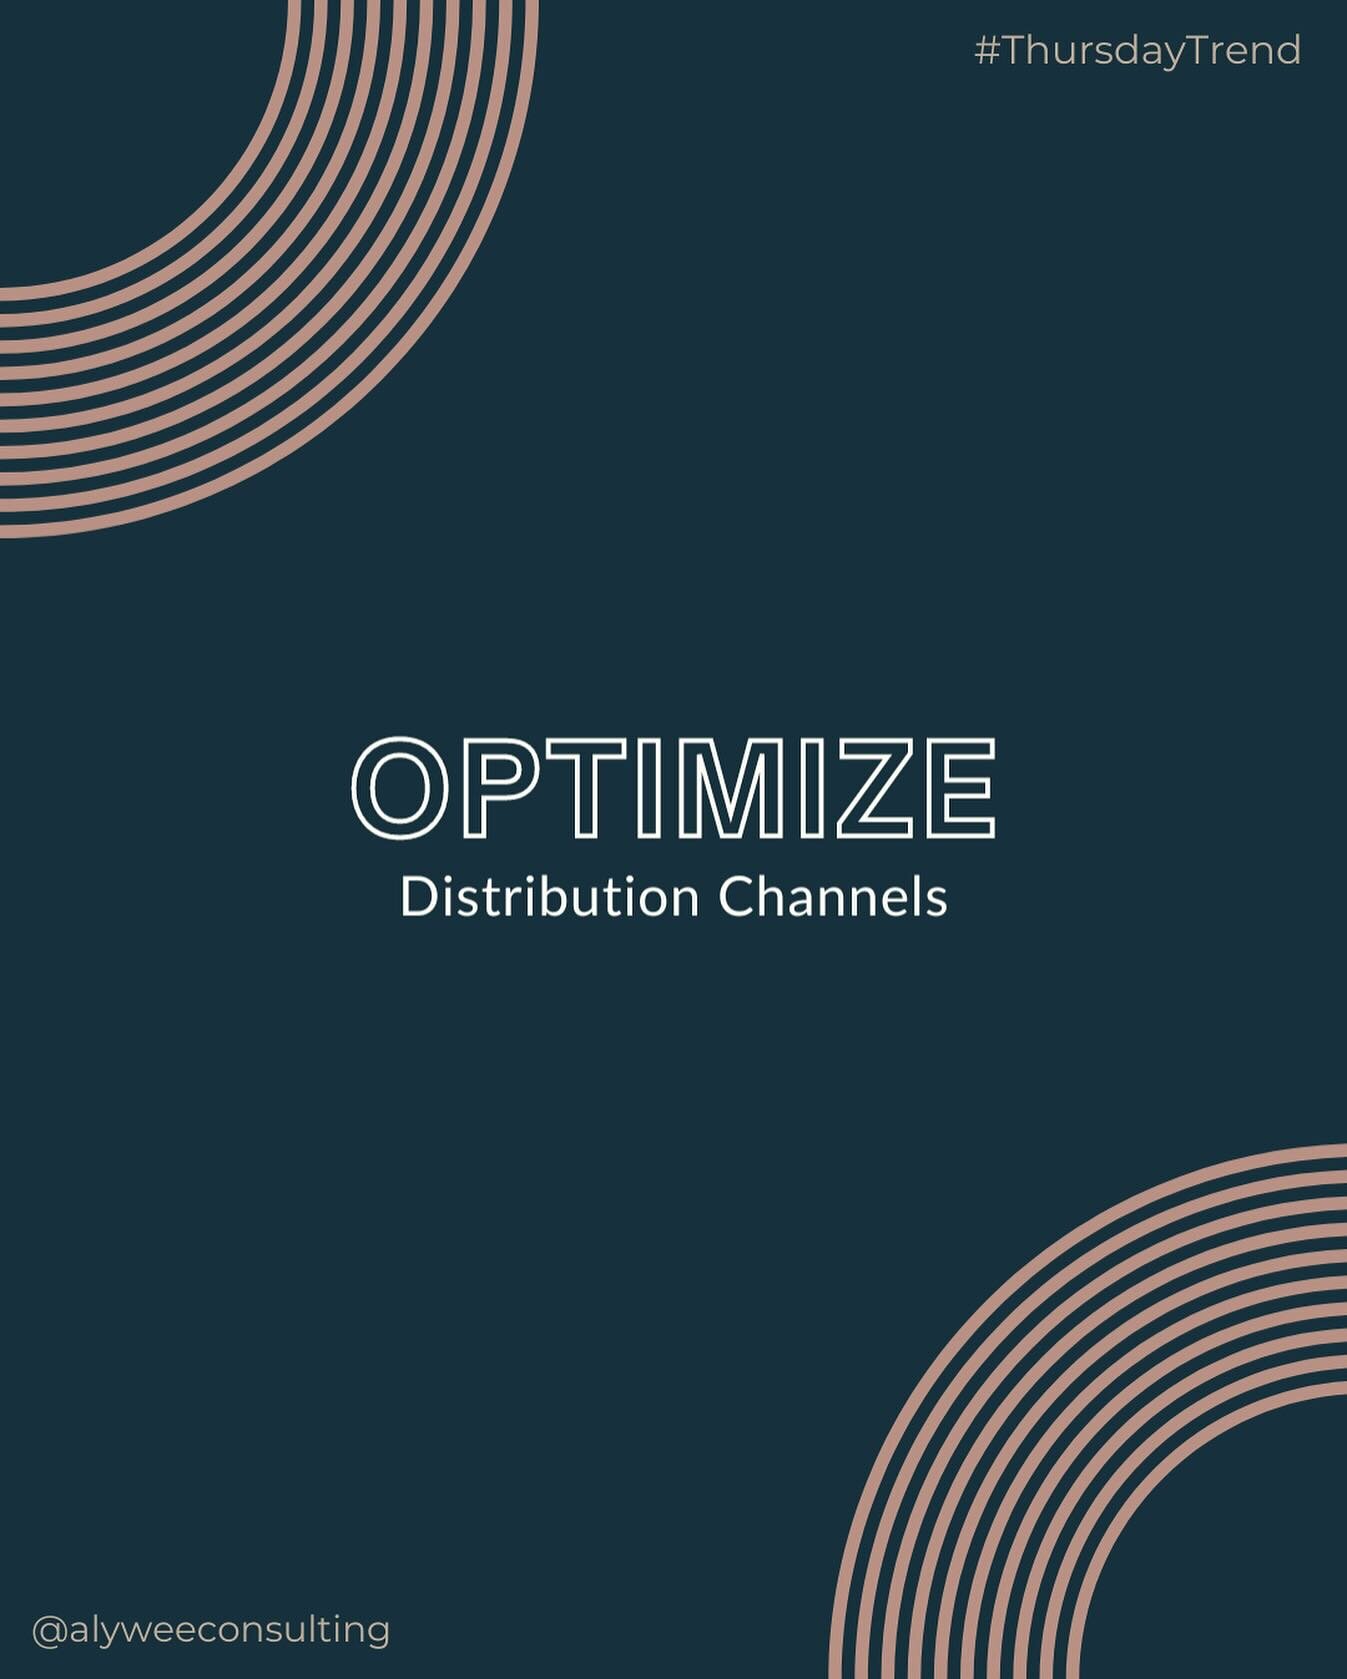 This #ThursdayTrend emphasizes the crucial role of optimizing distribution channels for maximum reach and revenue.
 
🌐 Optimize your distribution channels! From cultivating direct bookings to forming strategic partnerships, finding the optimal mix i